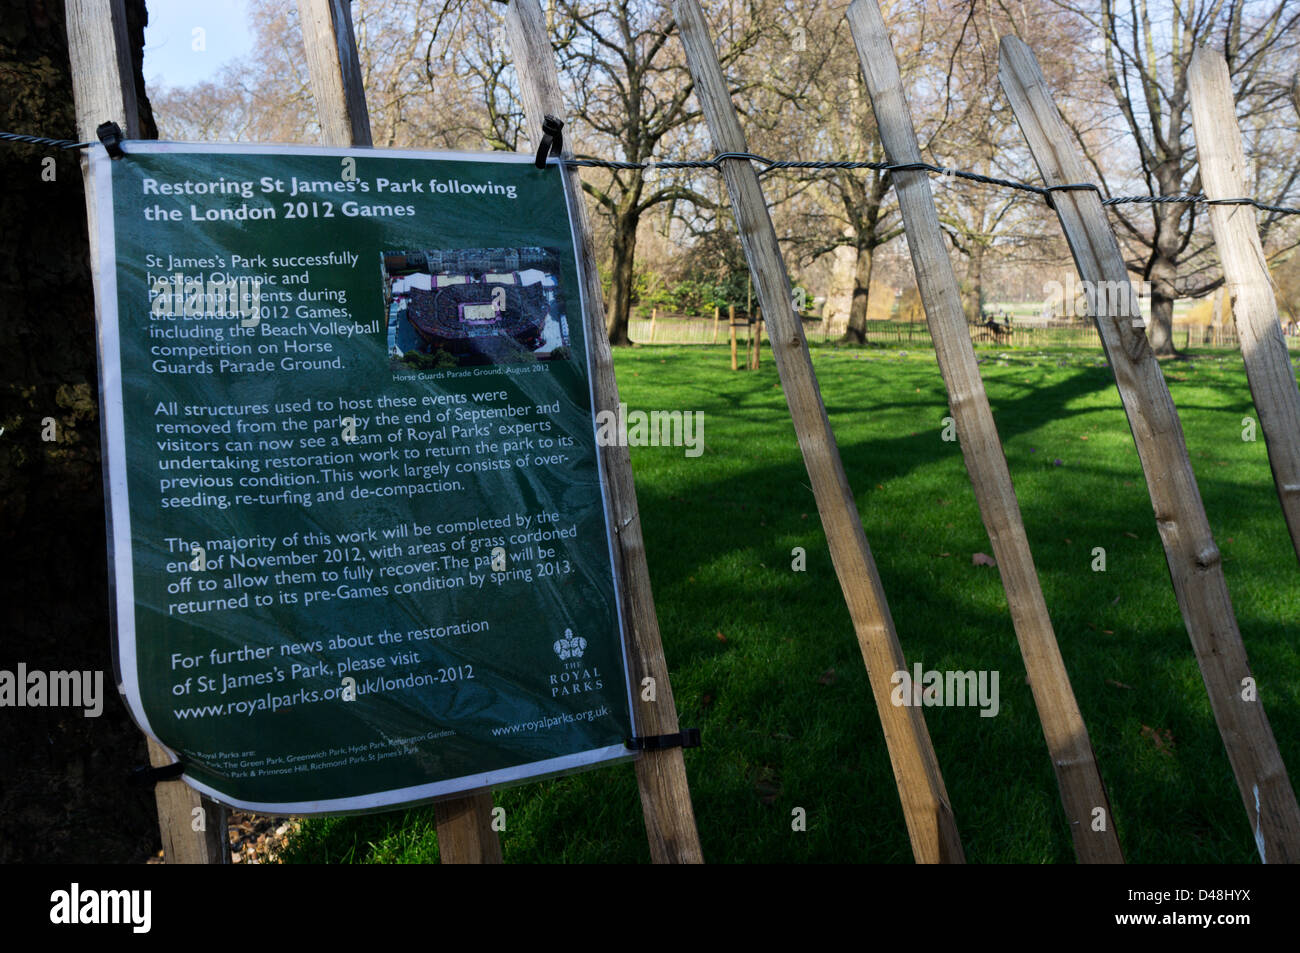 A notice gives a report on restoration of St James's Park following the 2012 Olympics. Stock Photo